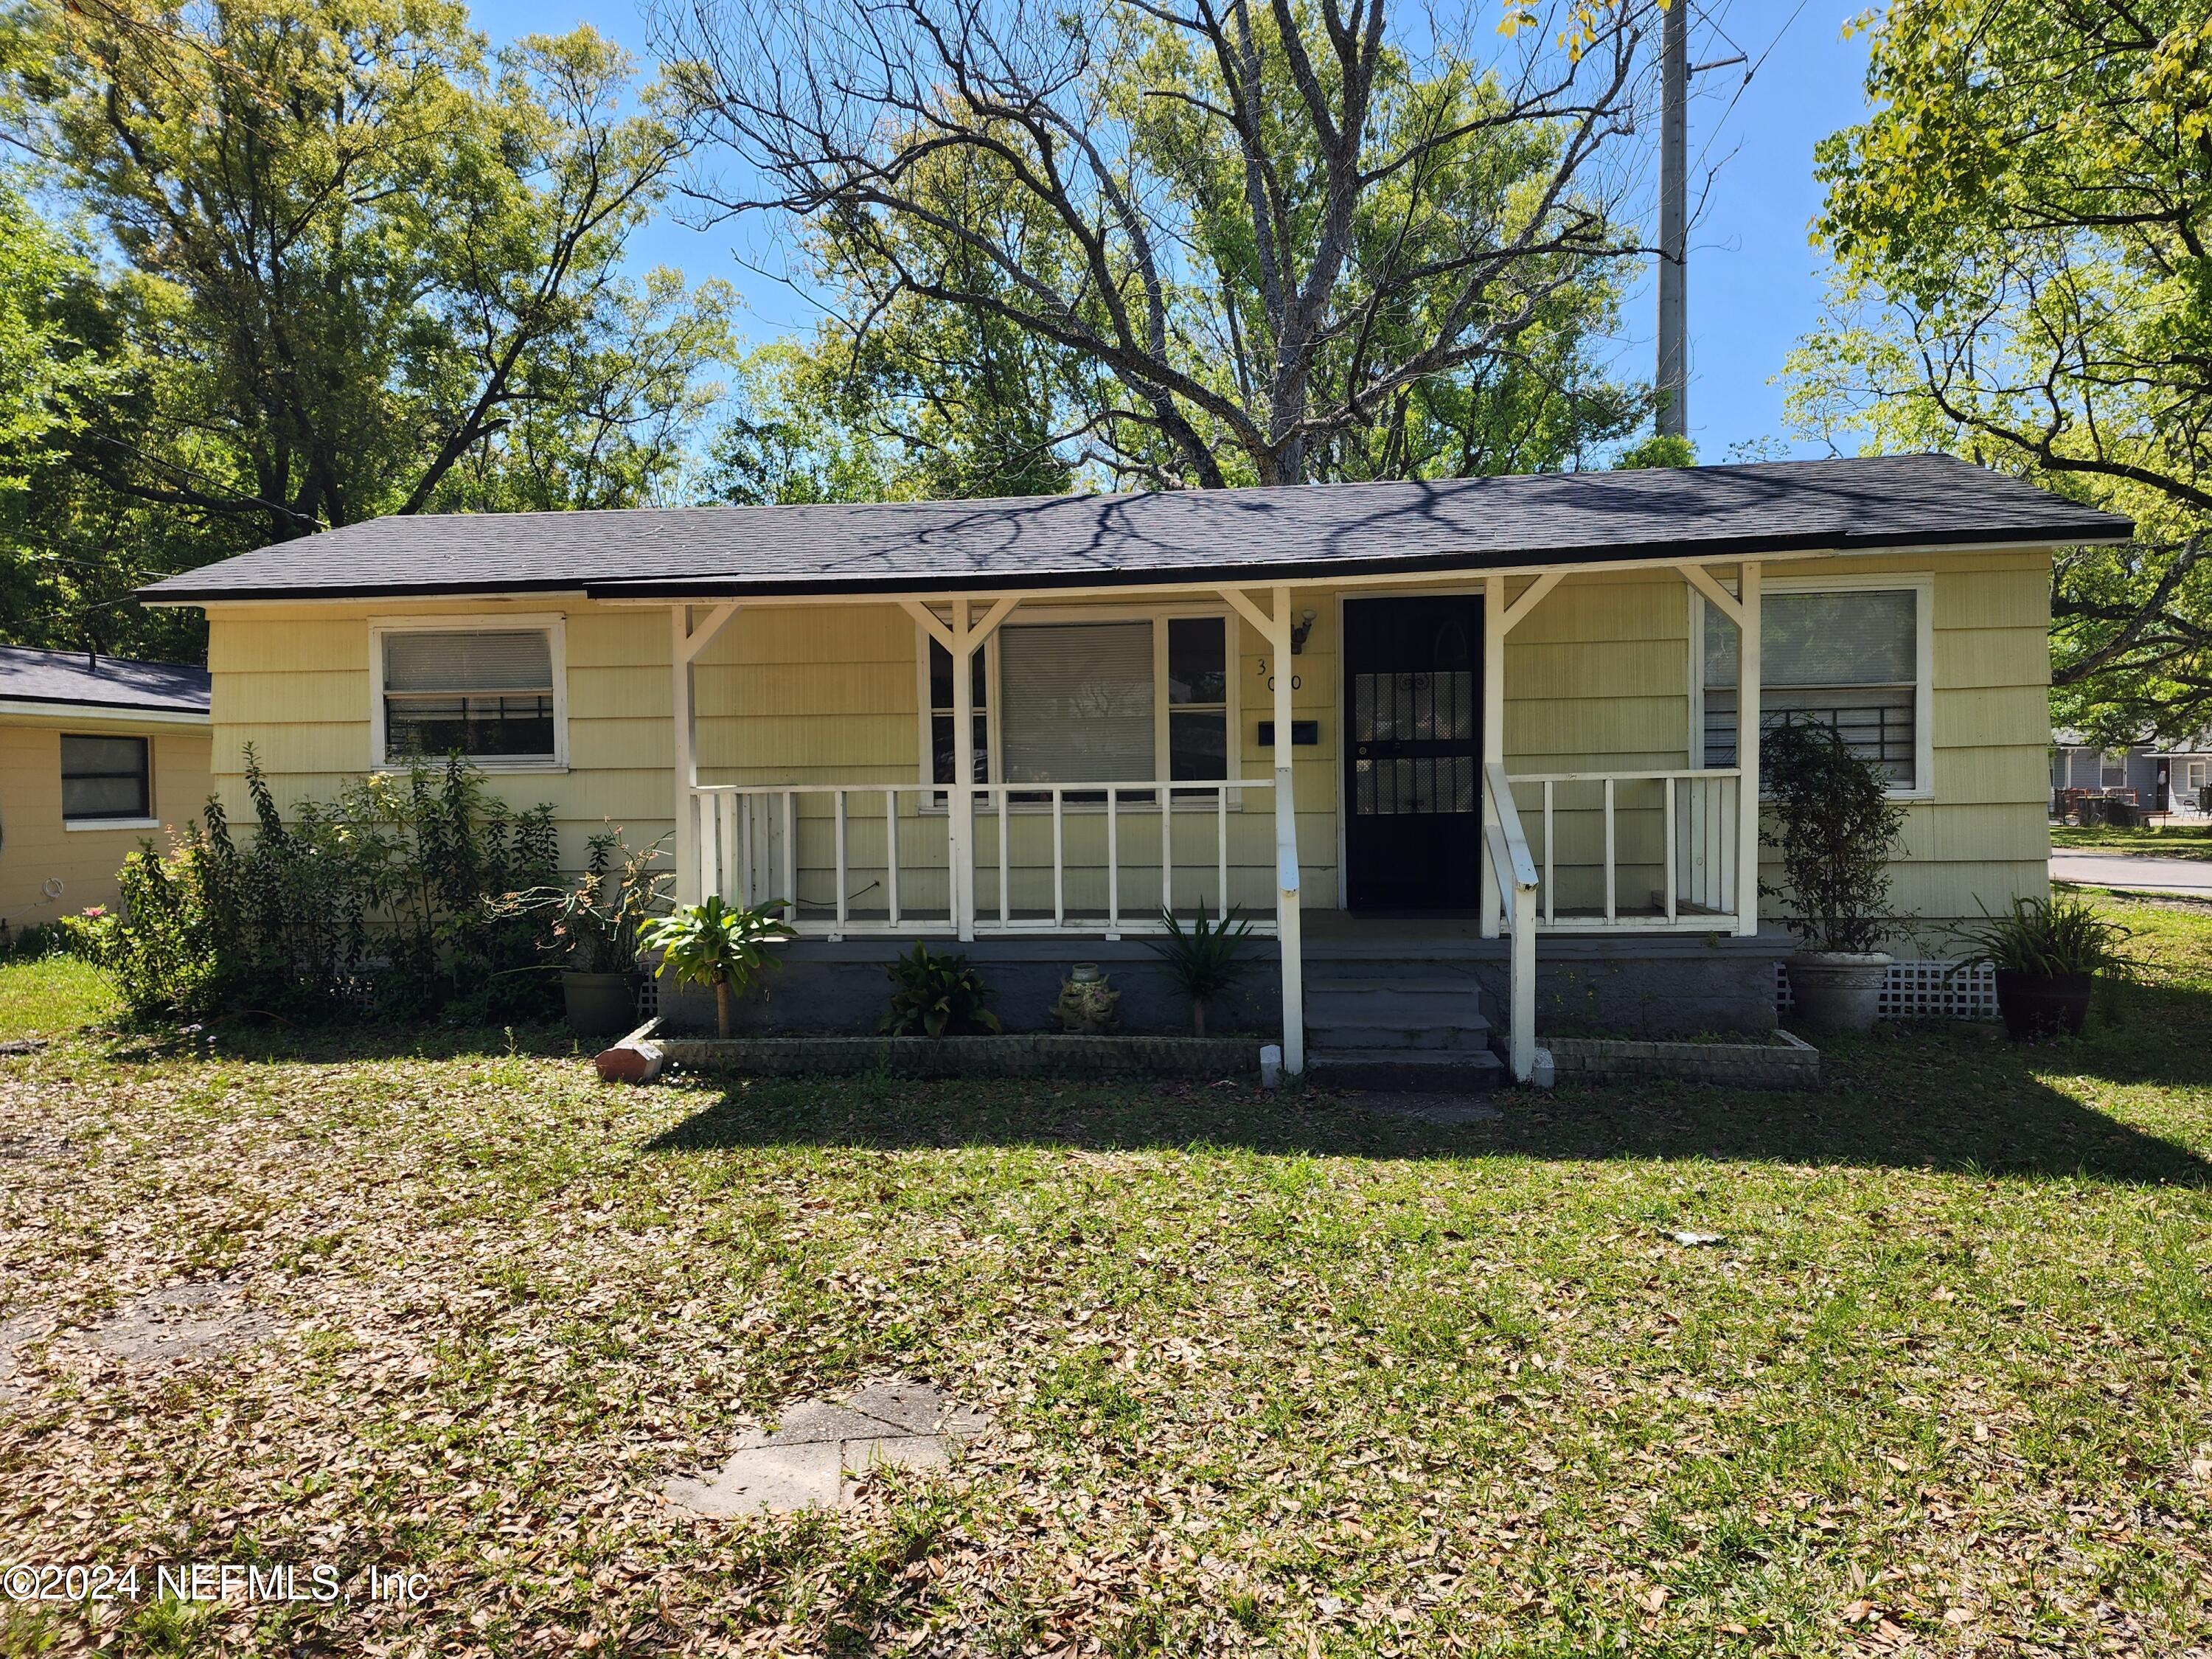 Jacksonville, FL home for sale located at 3090 W 18th Street, Jacksonville, FL 32254